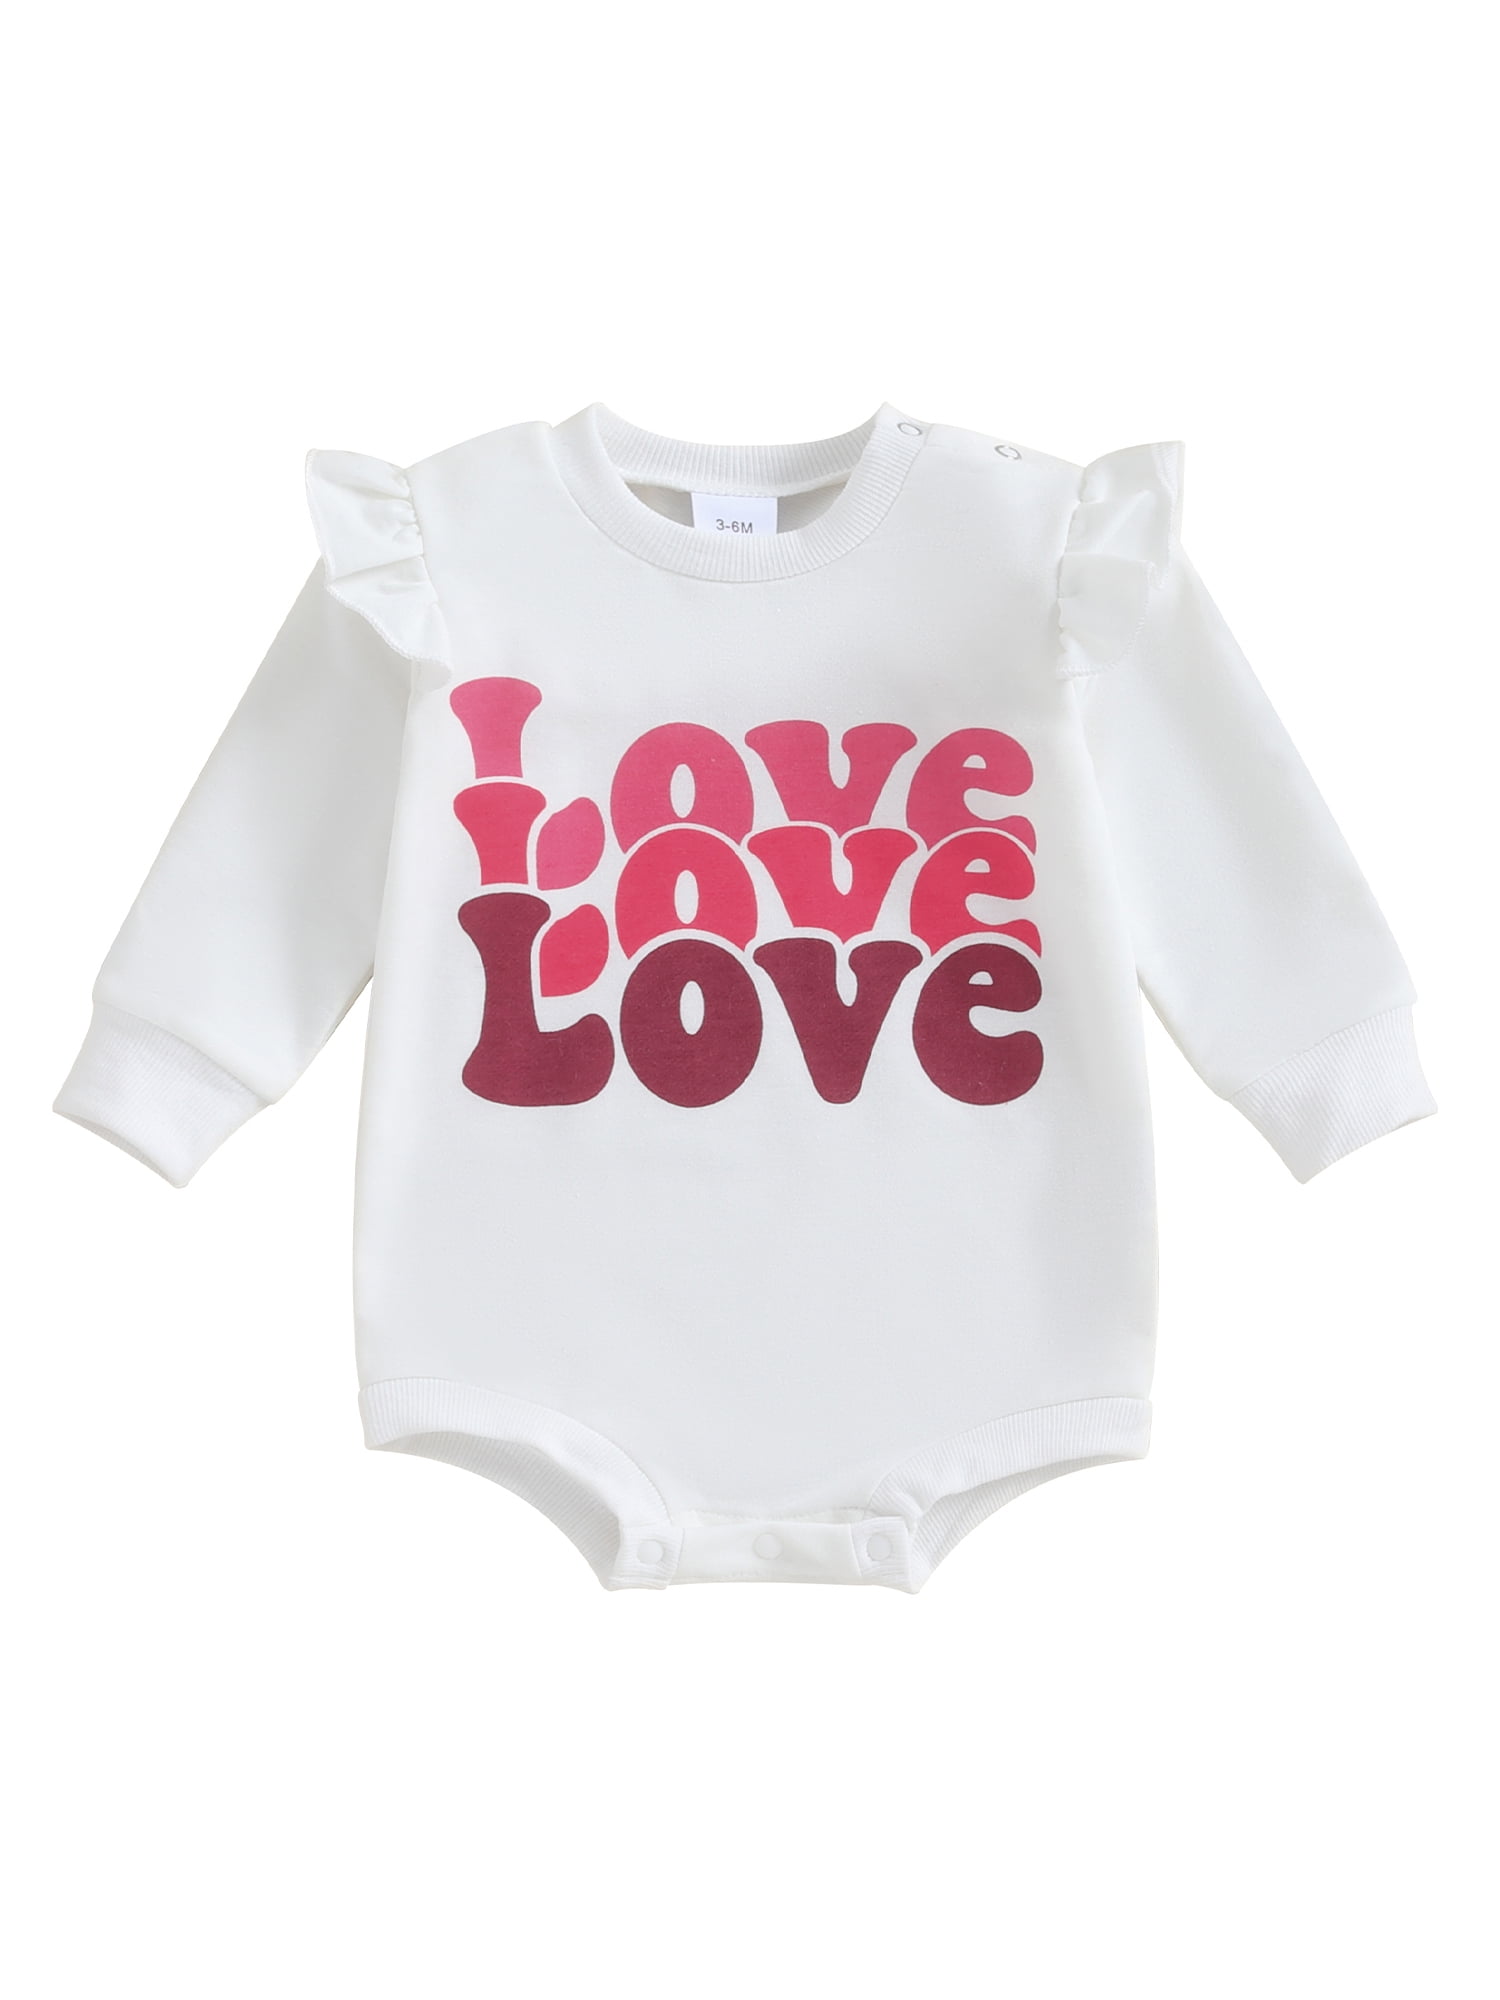 AMILIEe Baby Girls Romper, Long Sleeve Crew Neck Heart Print Fall ...